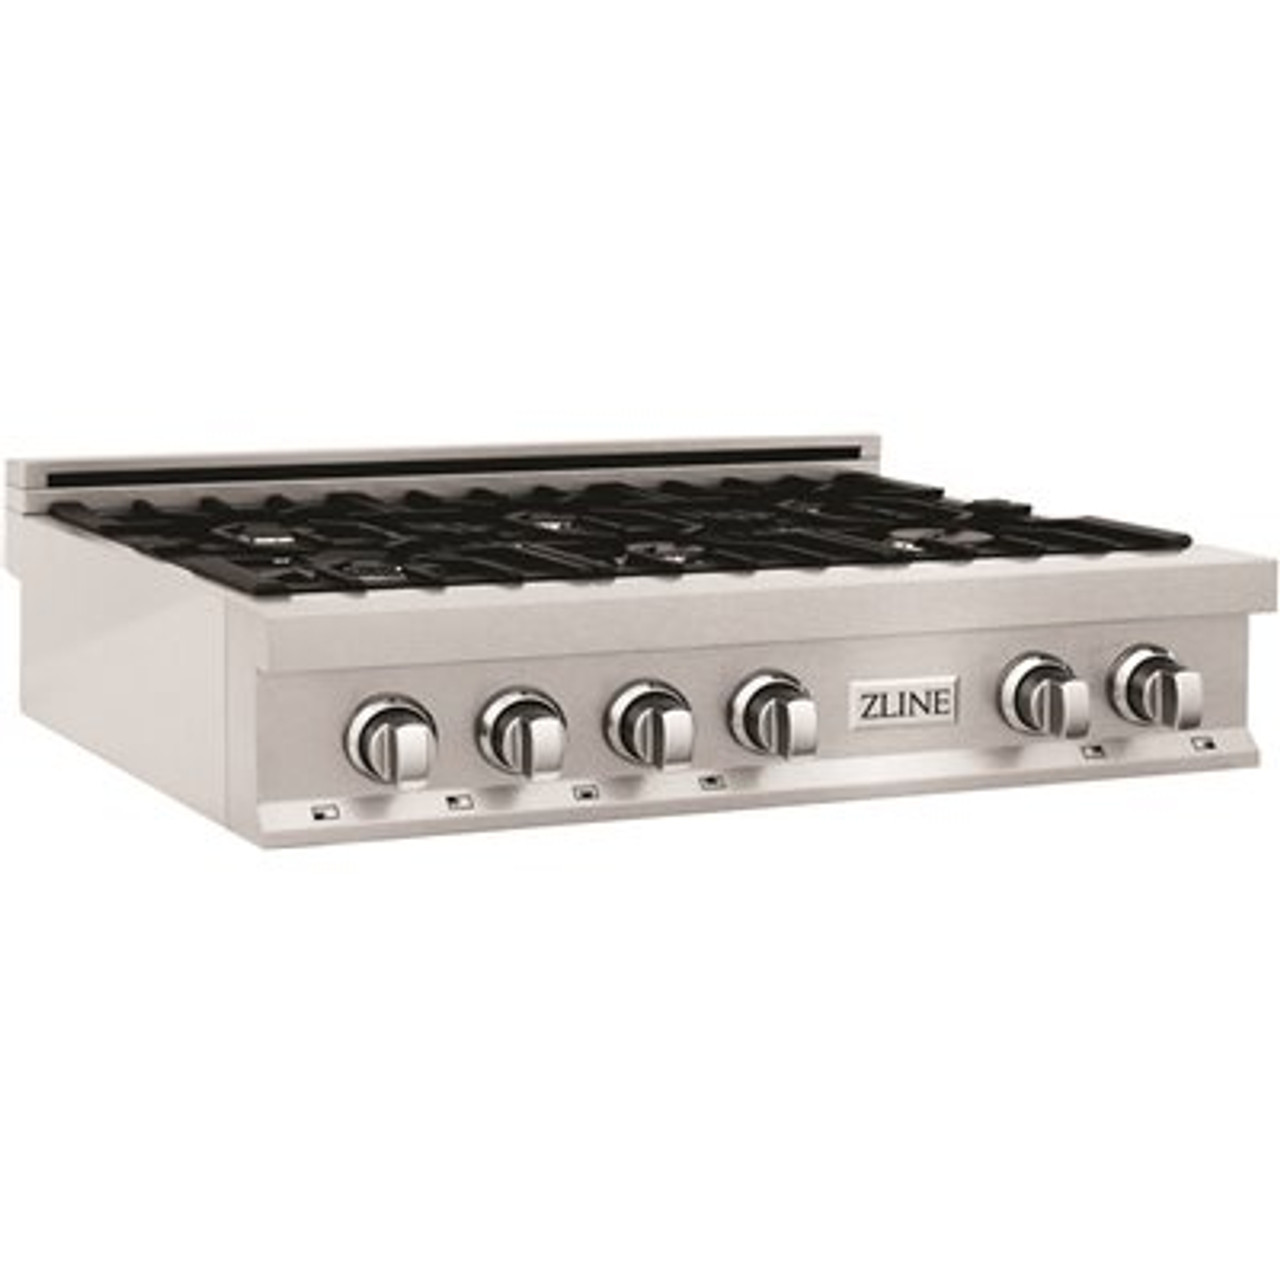 Zline Kitchen And Bath Zline 36 In. Porcelain Gas Cooktop In Durasnow Stainless Steel With 6 Gas Burners